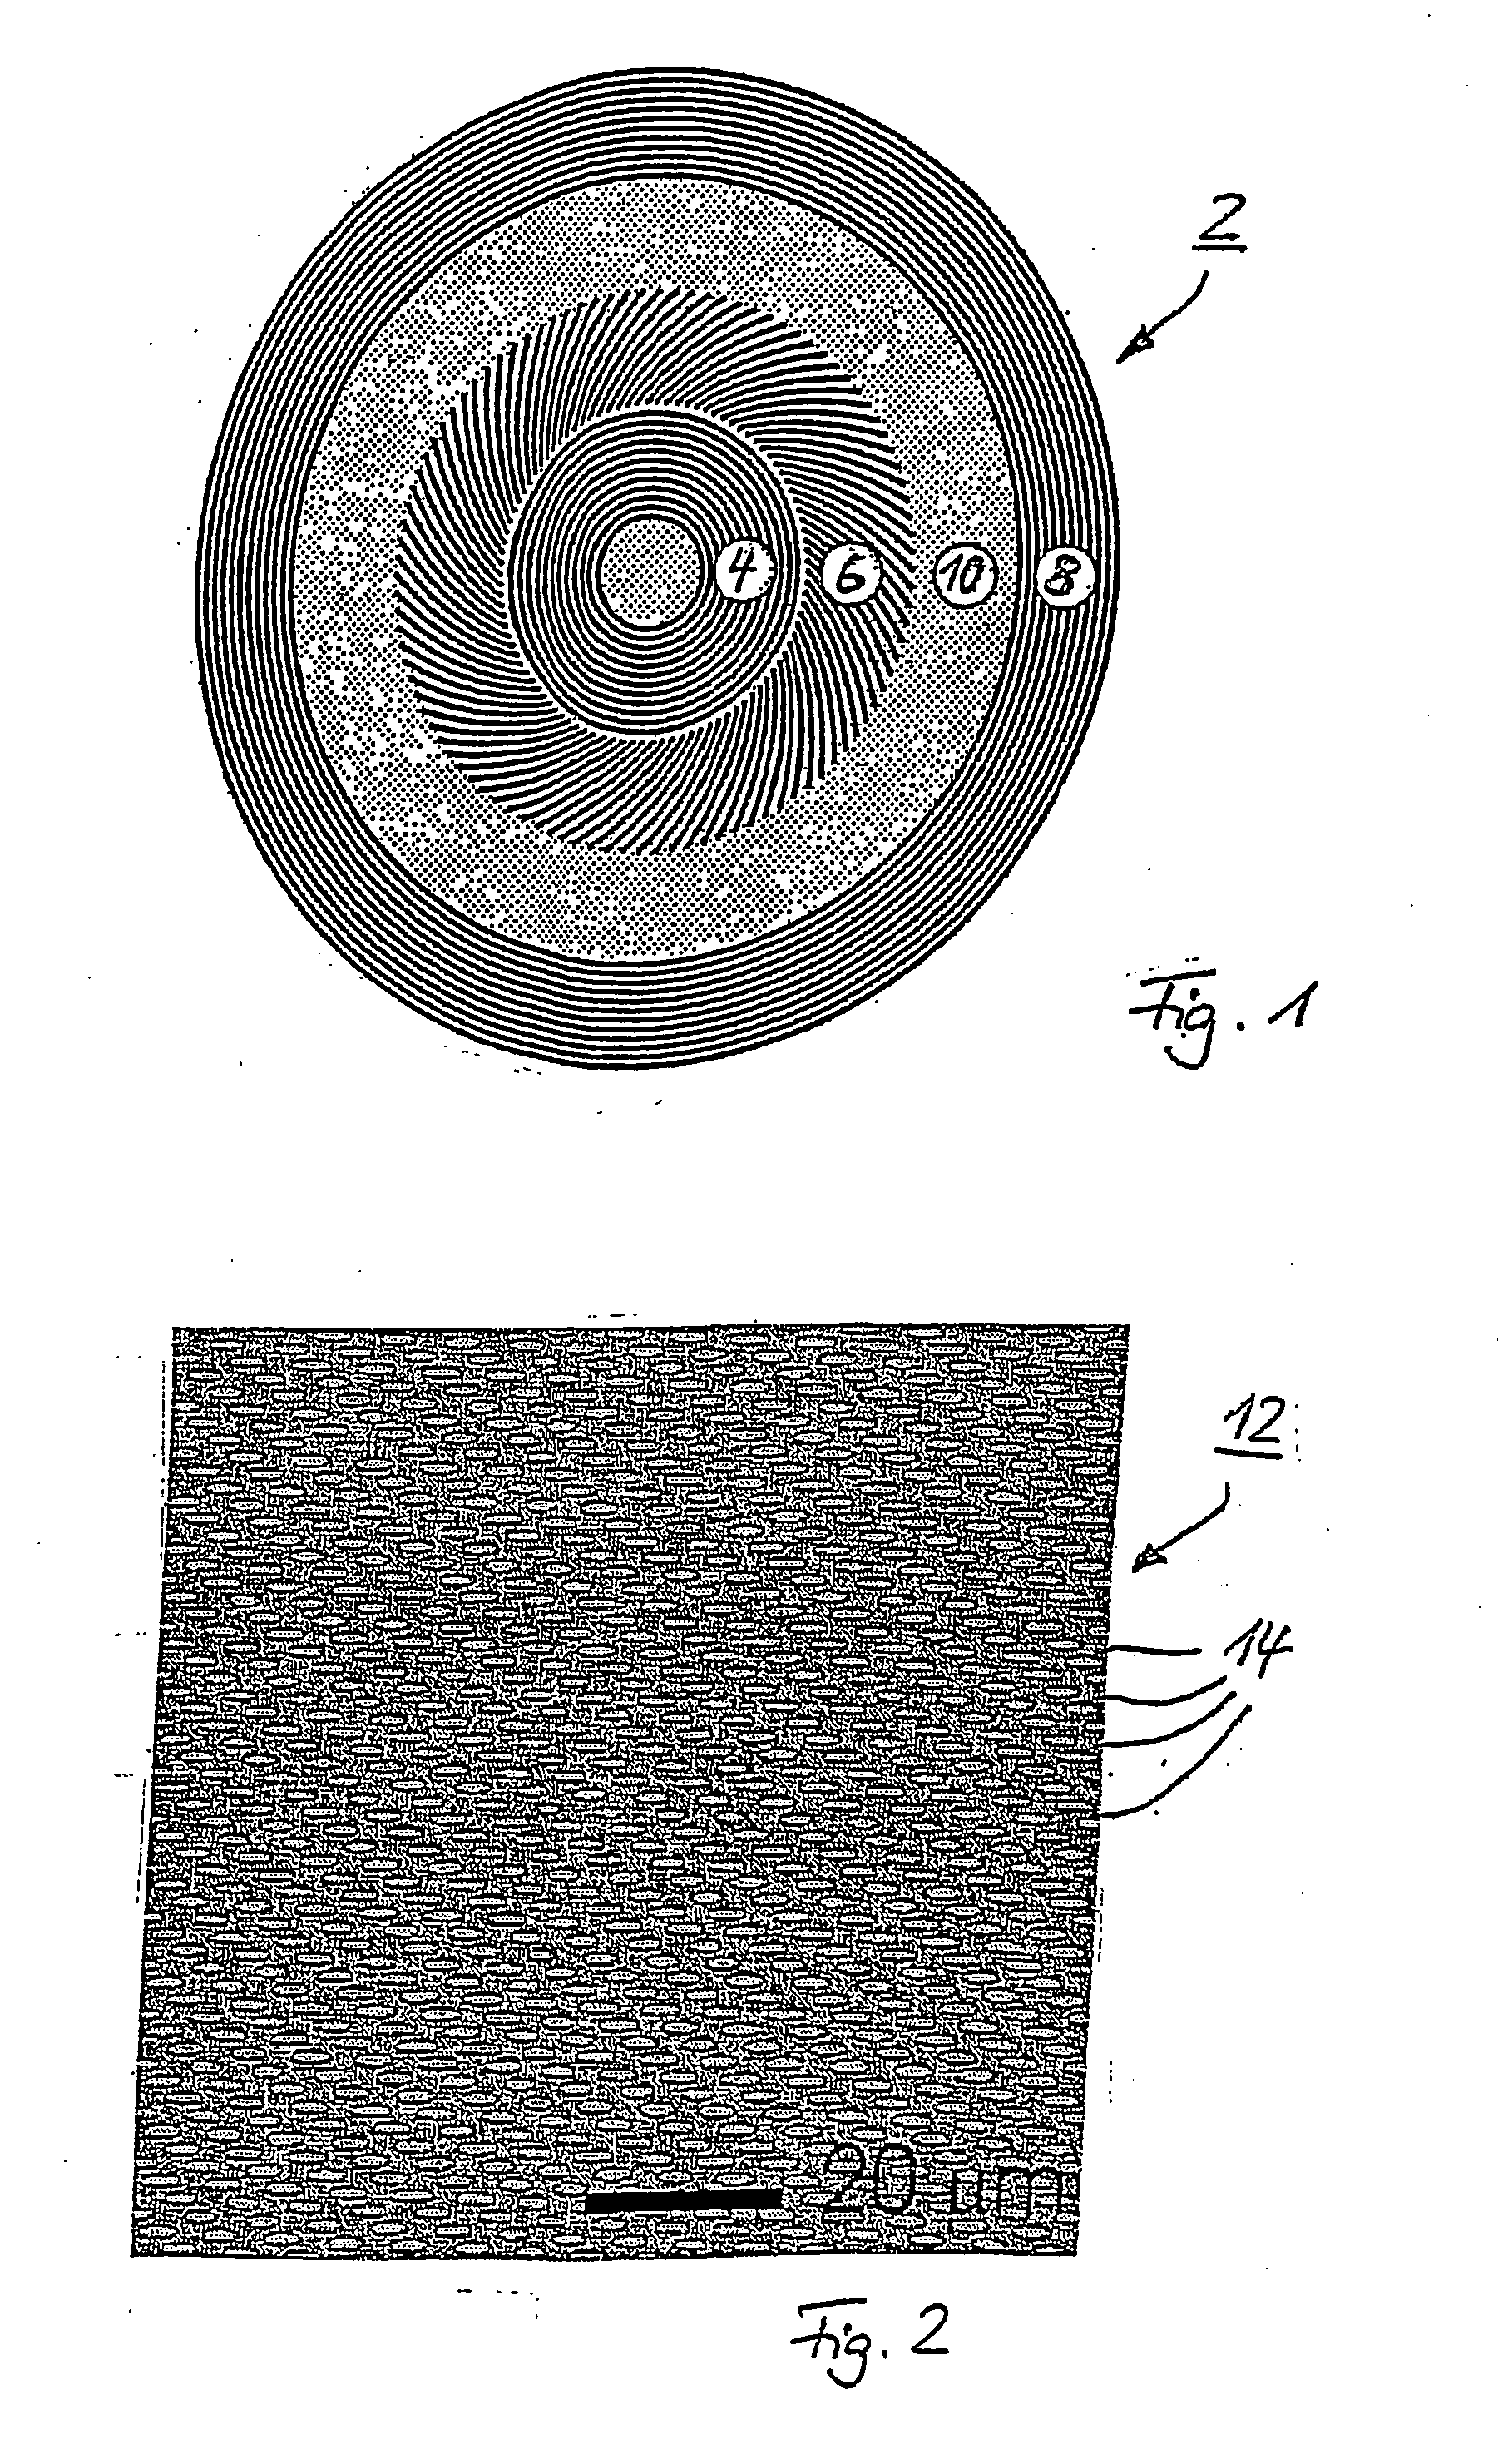 Method for generating a circular periodic structure on a basic support material